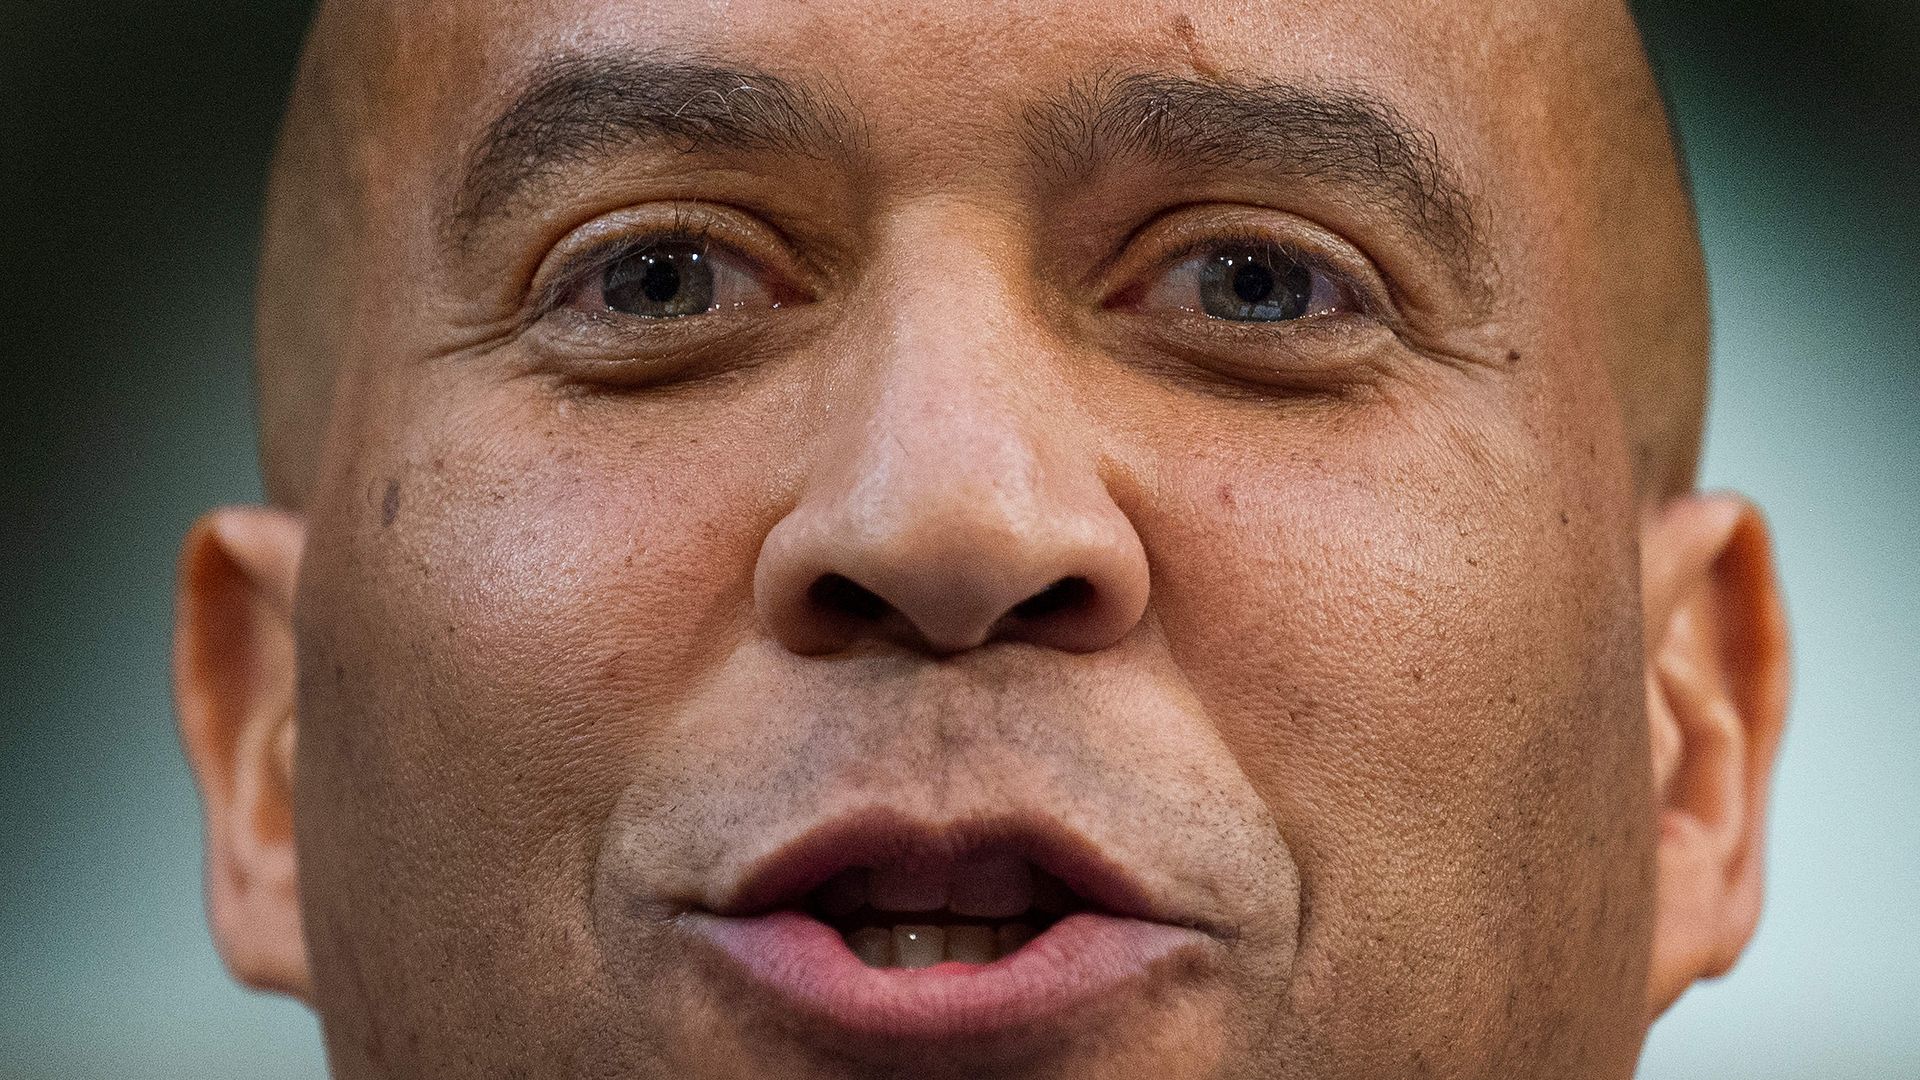 Sen. Cory Booker is seen in a close-up photo.